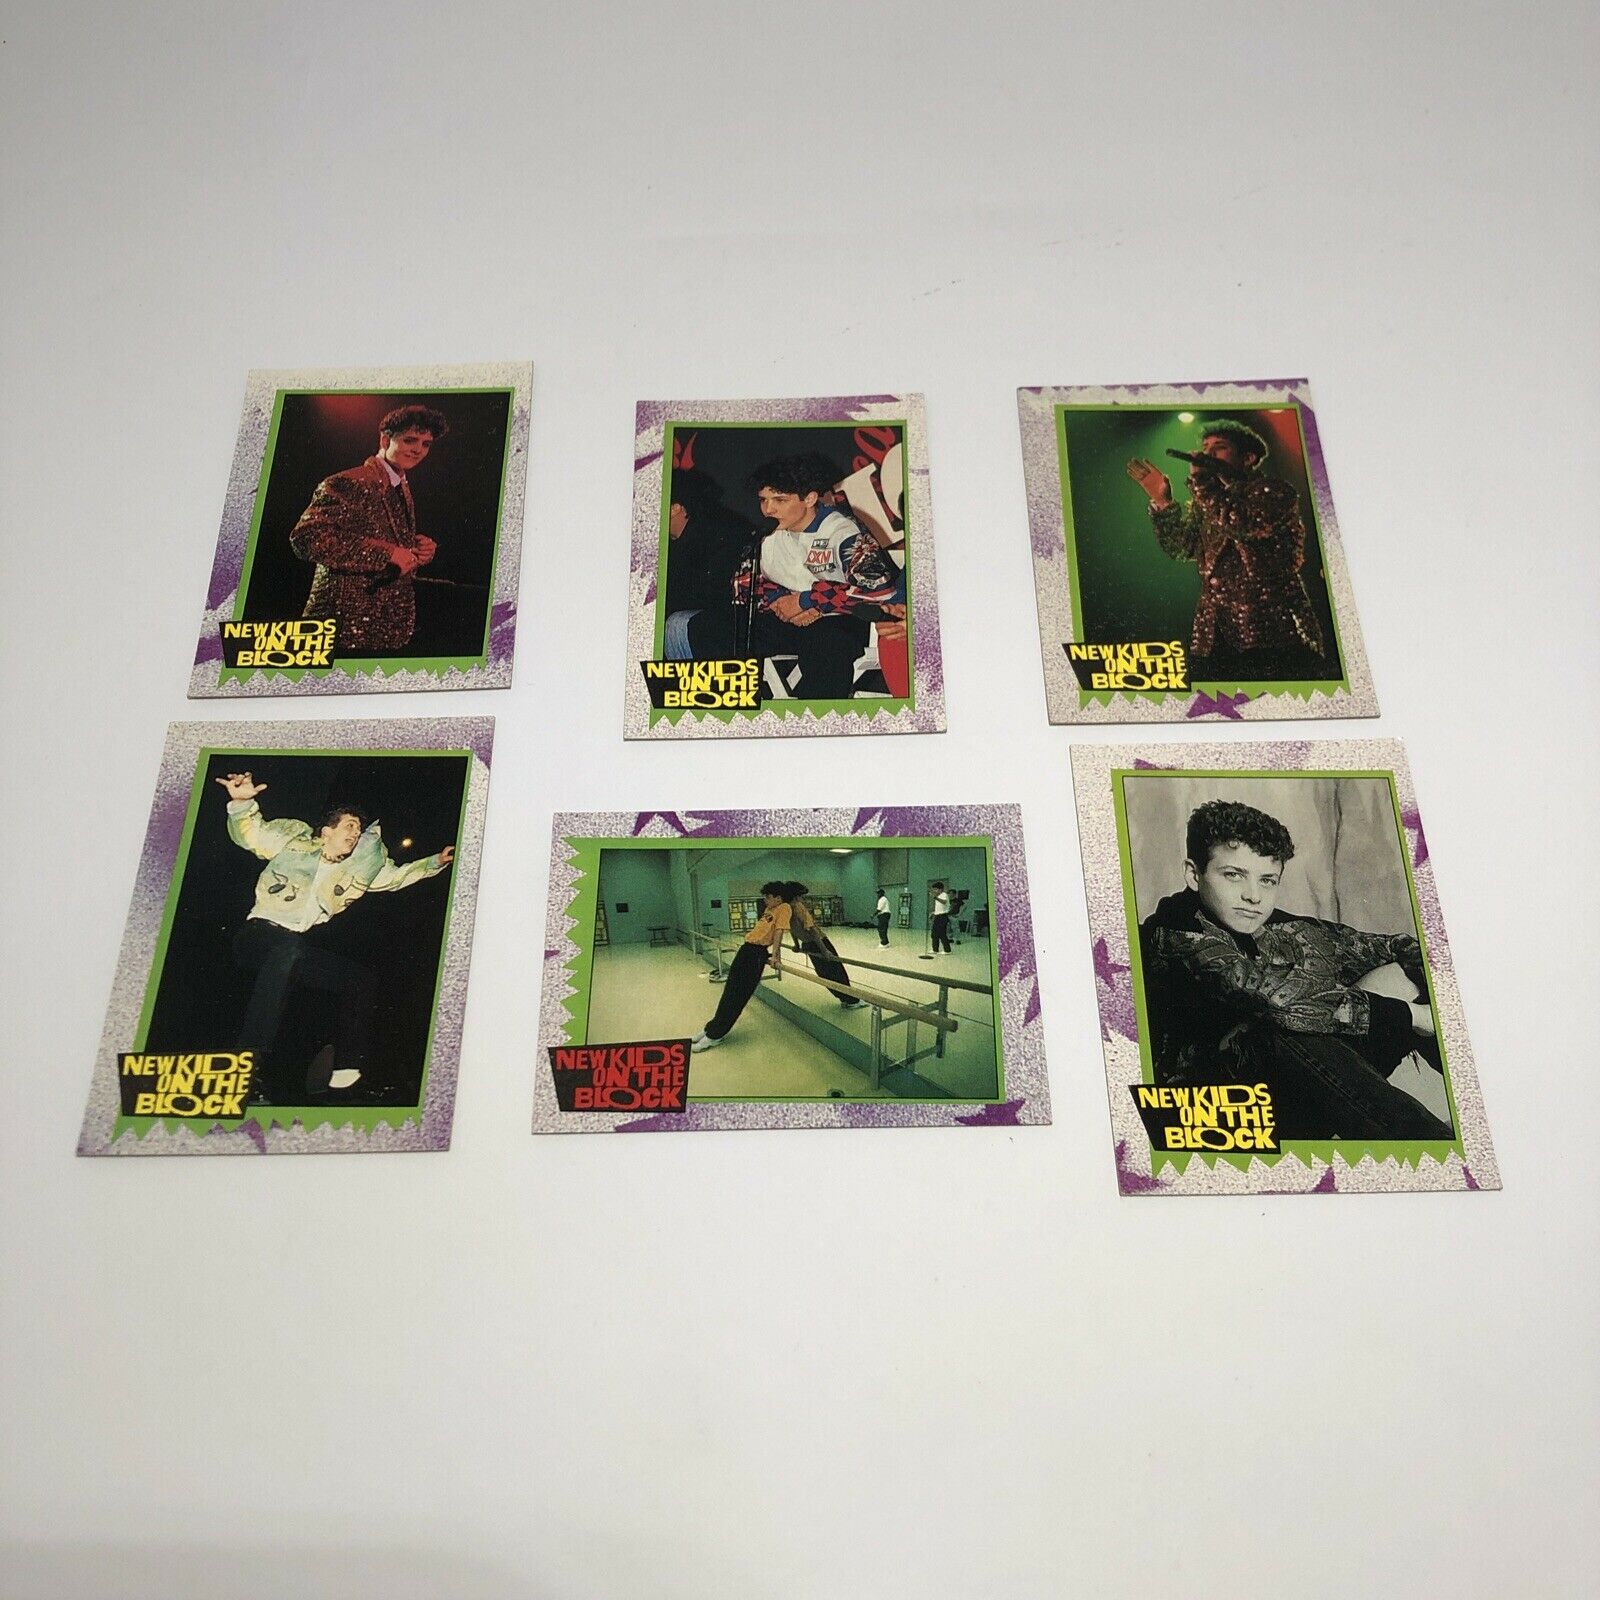 NEW KIDS ON THE BLOCK 1990 Trading Cards Joey McIntyre Lot of 6 Cards VINTAGE